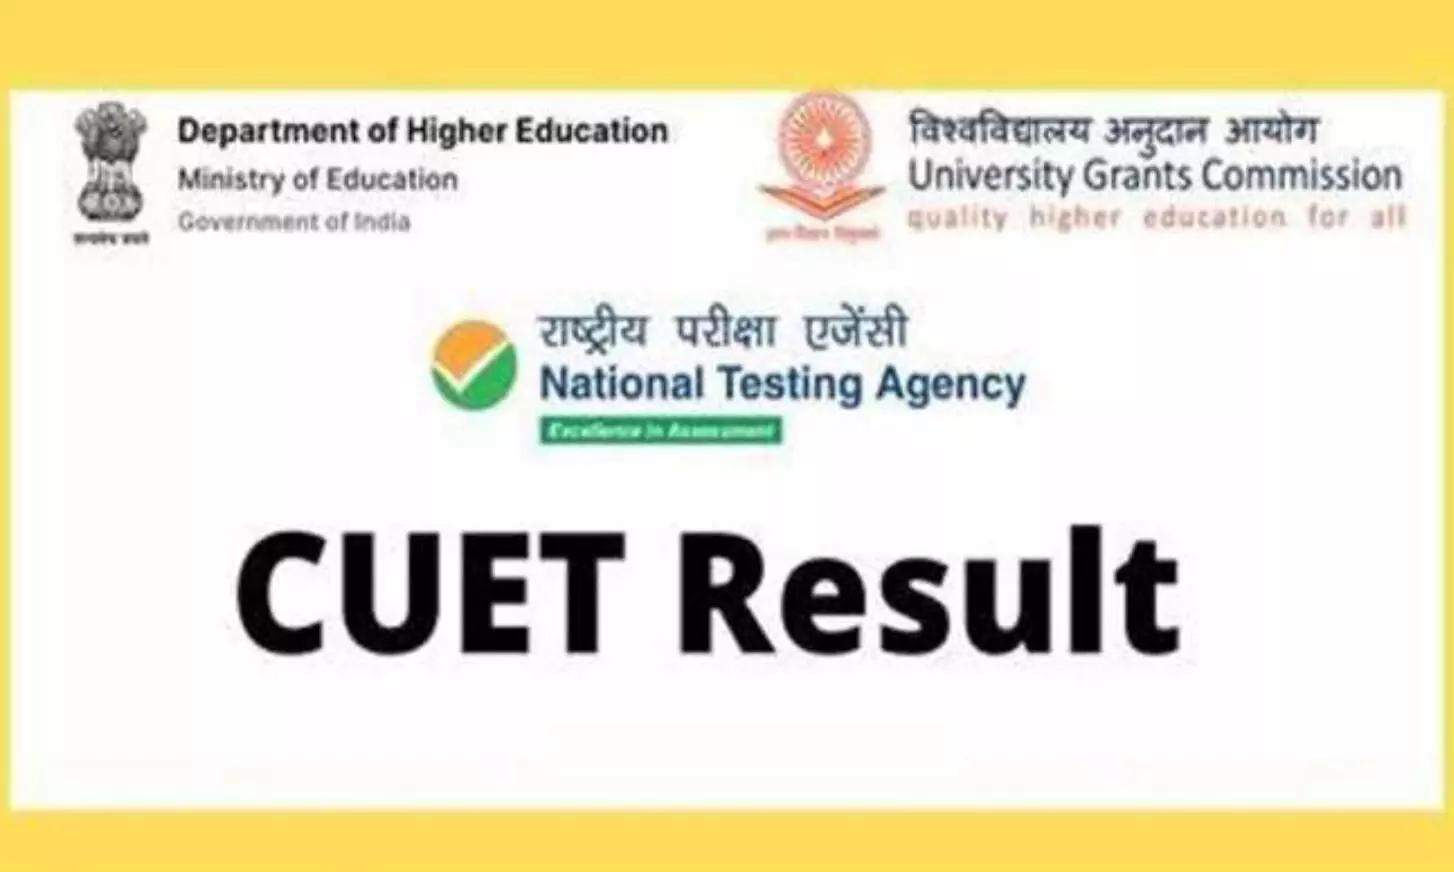 nta cuet result 2022 declared near about 7 september said nta